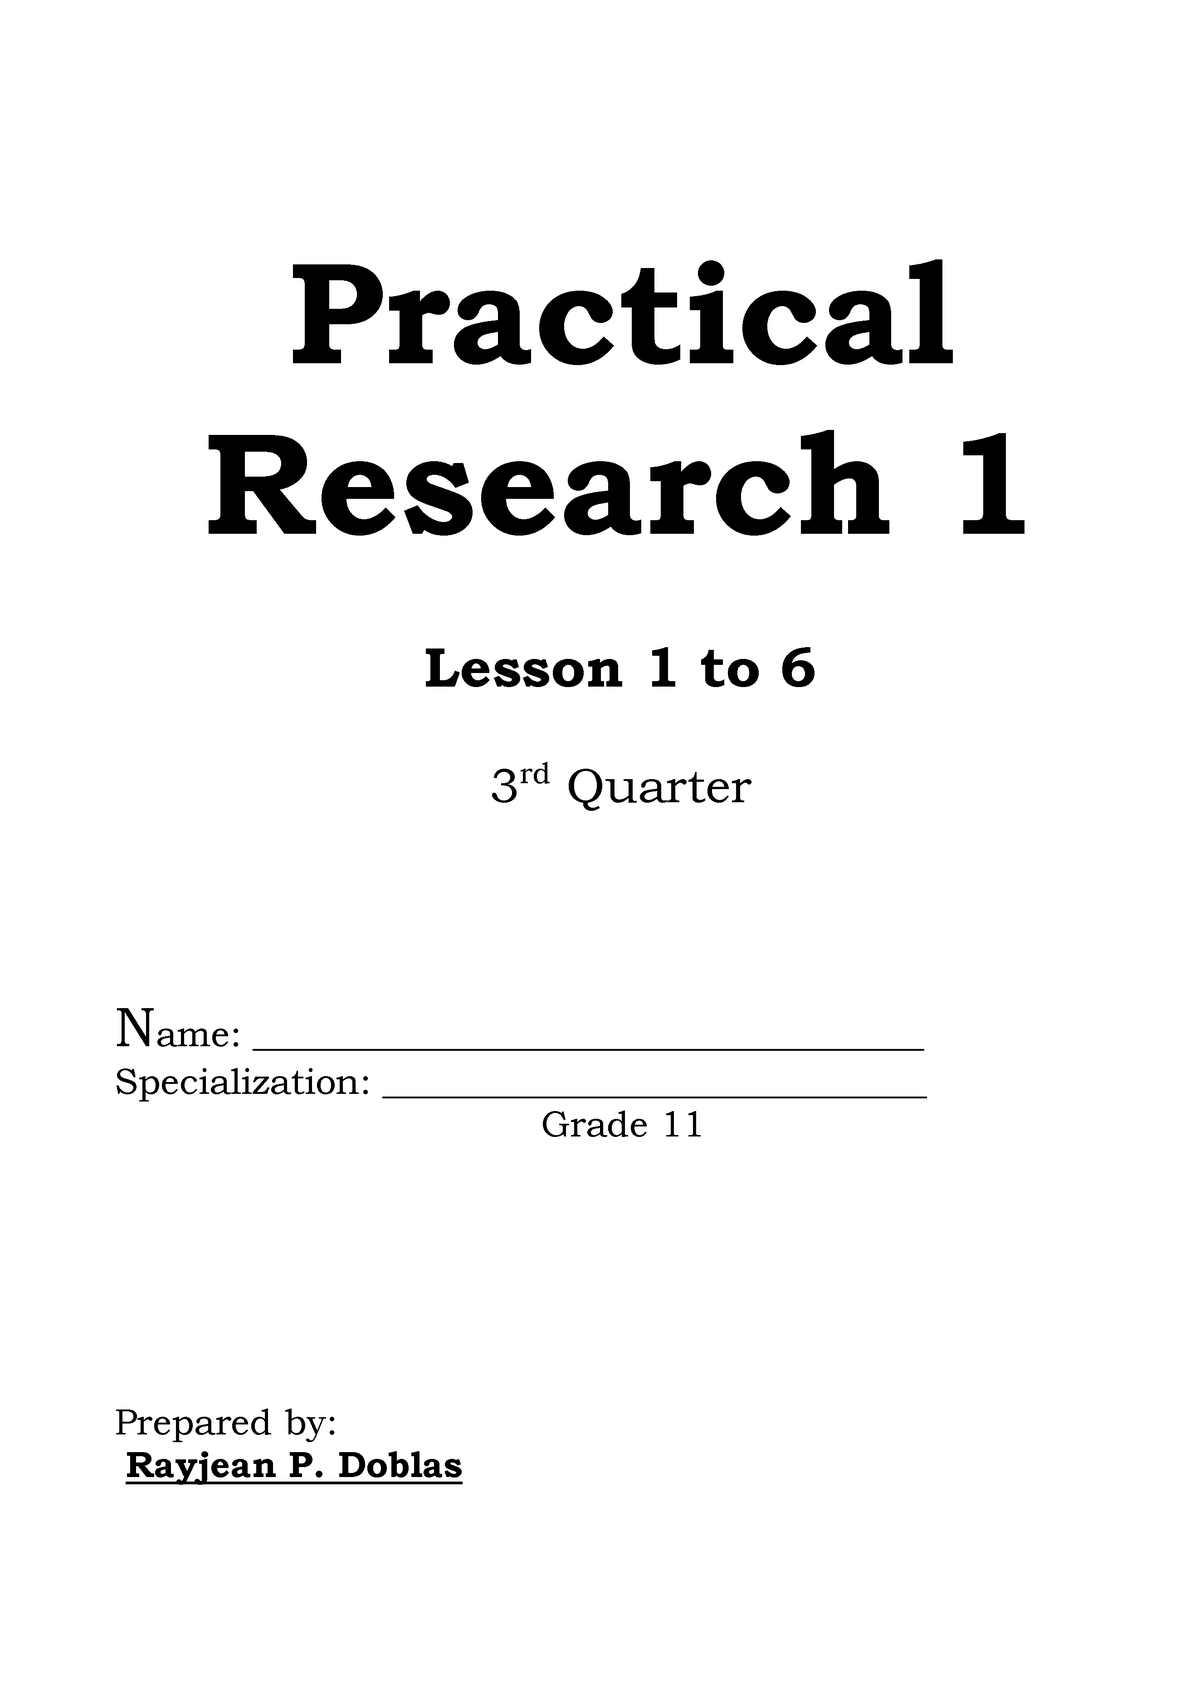 reflection about practical research 1 grade 11